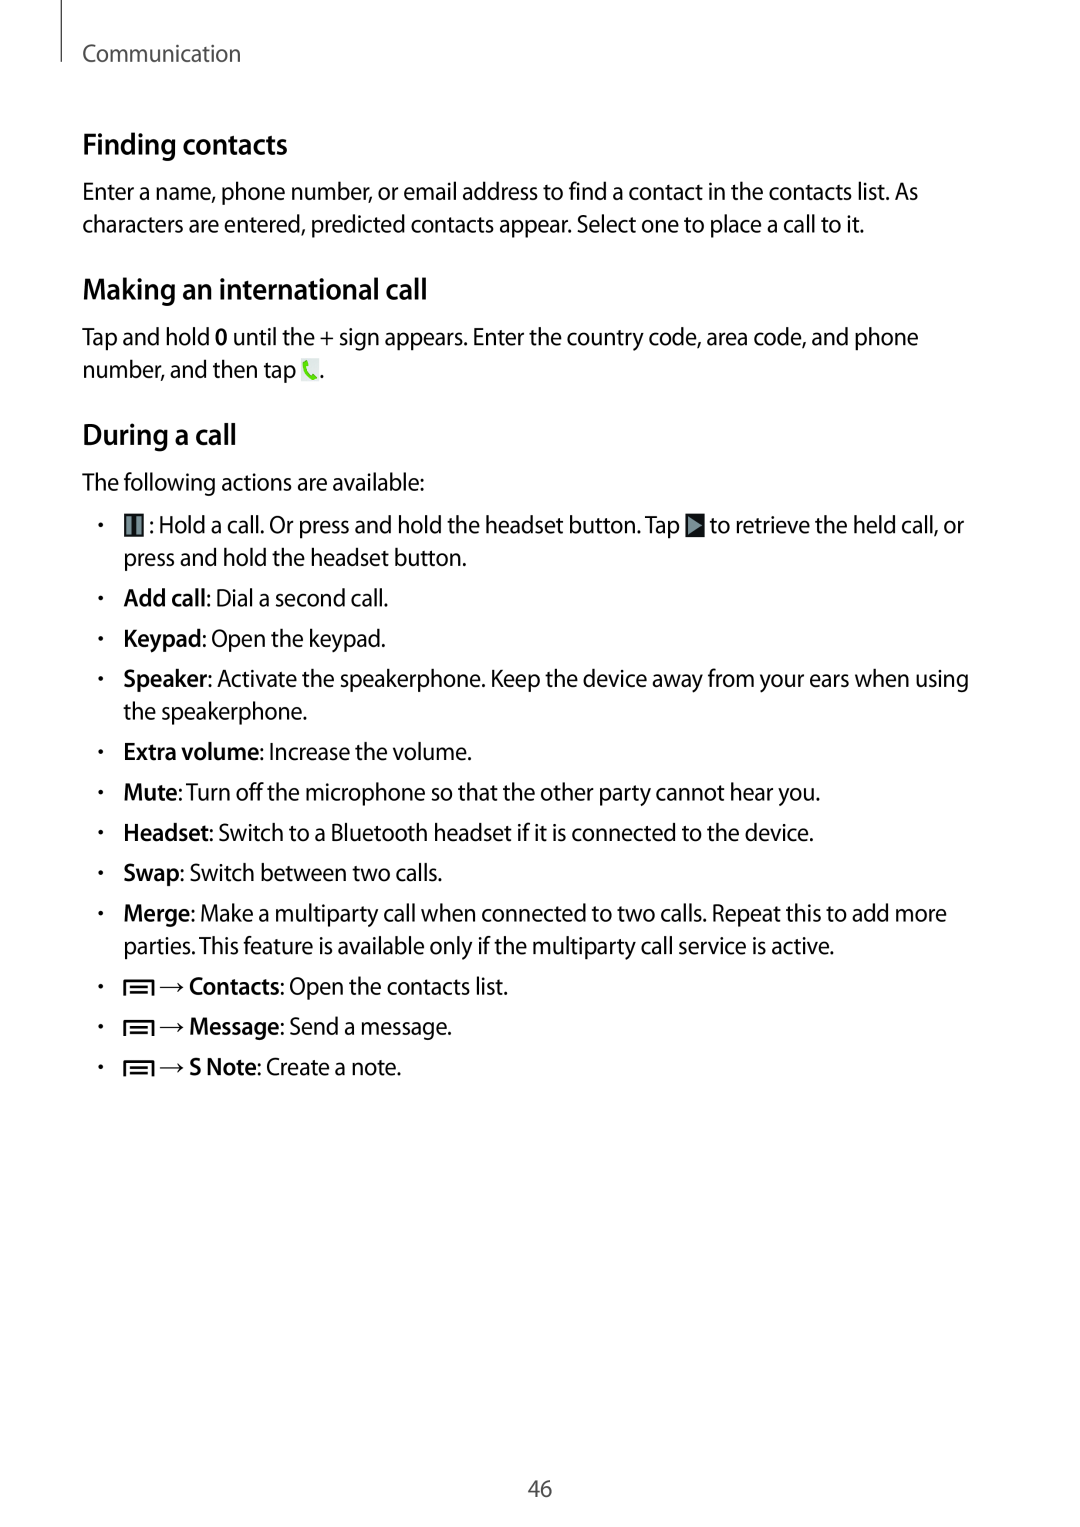 Samsung GT-N5100 user manual Finding contacts, Making an international call, During a call, Communication 